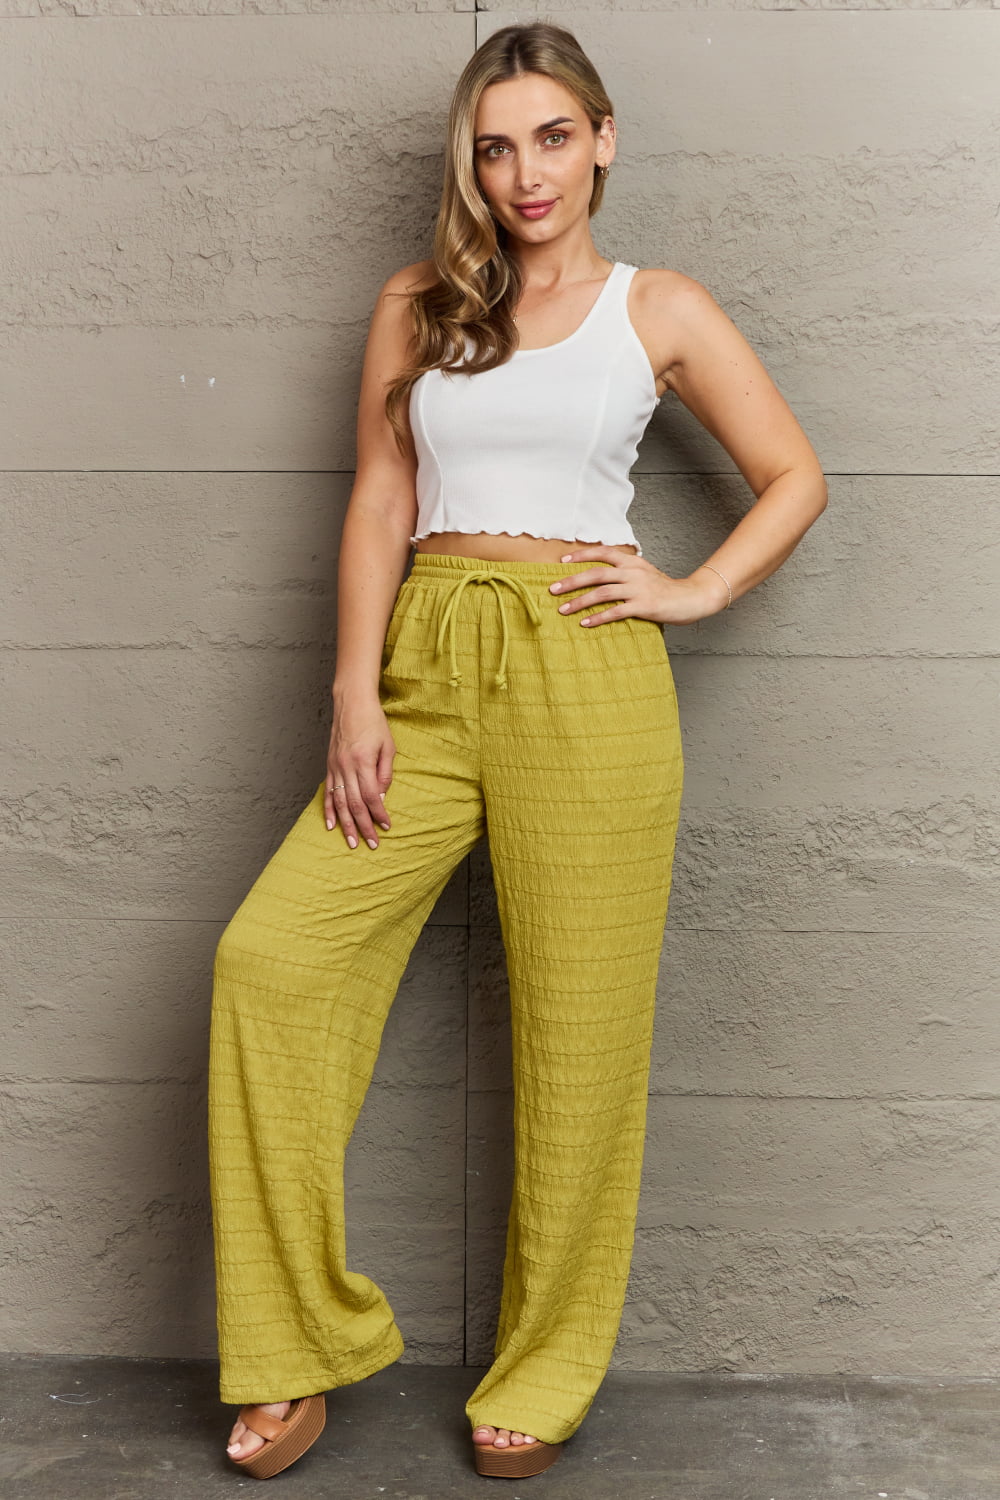 GeeGee Dainty Delights Textured High Waisted Pants